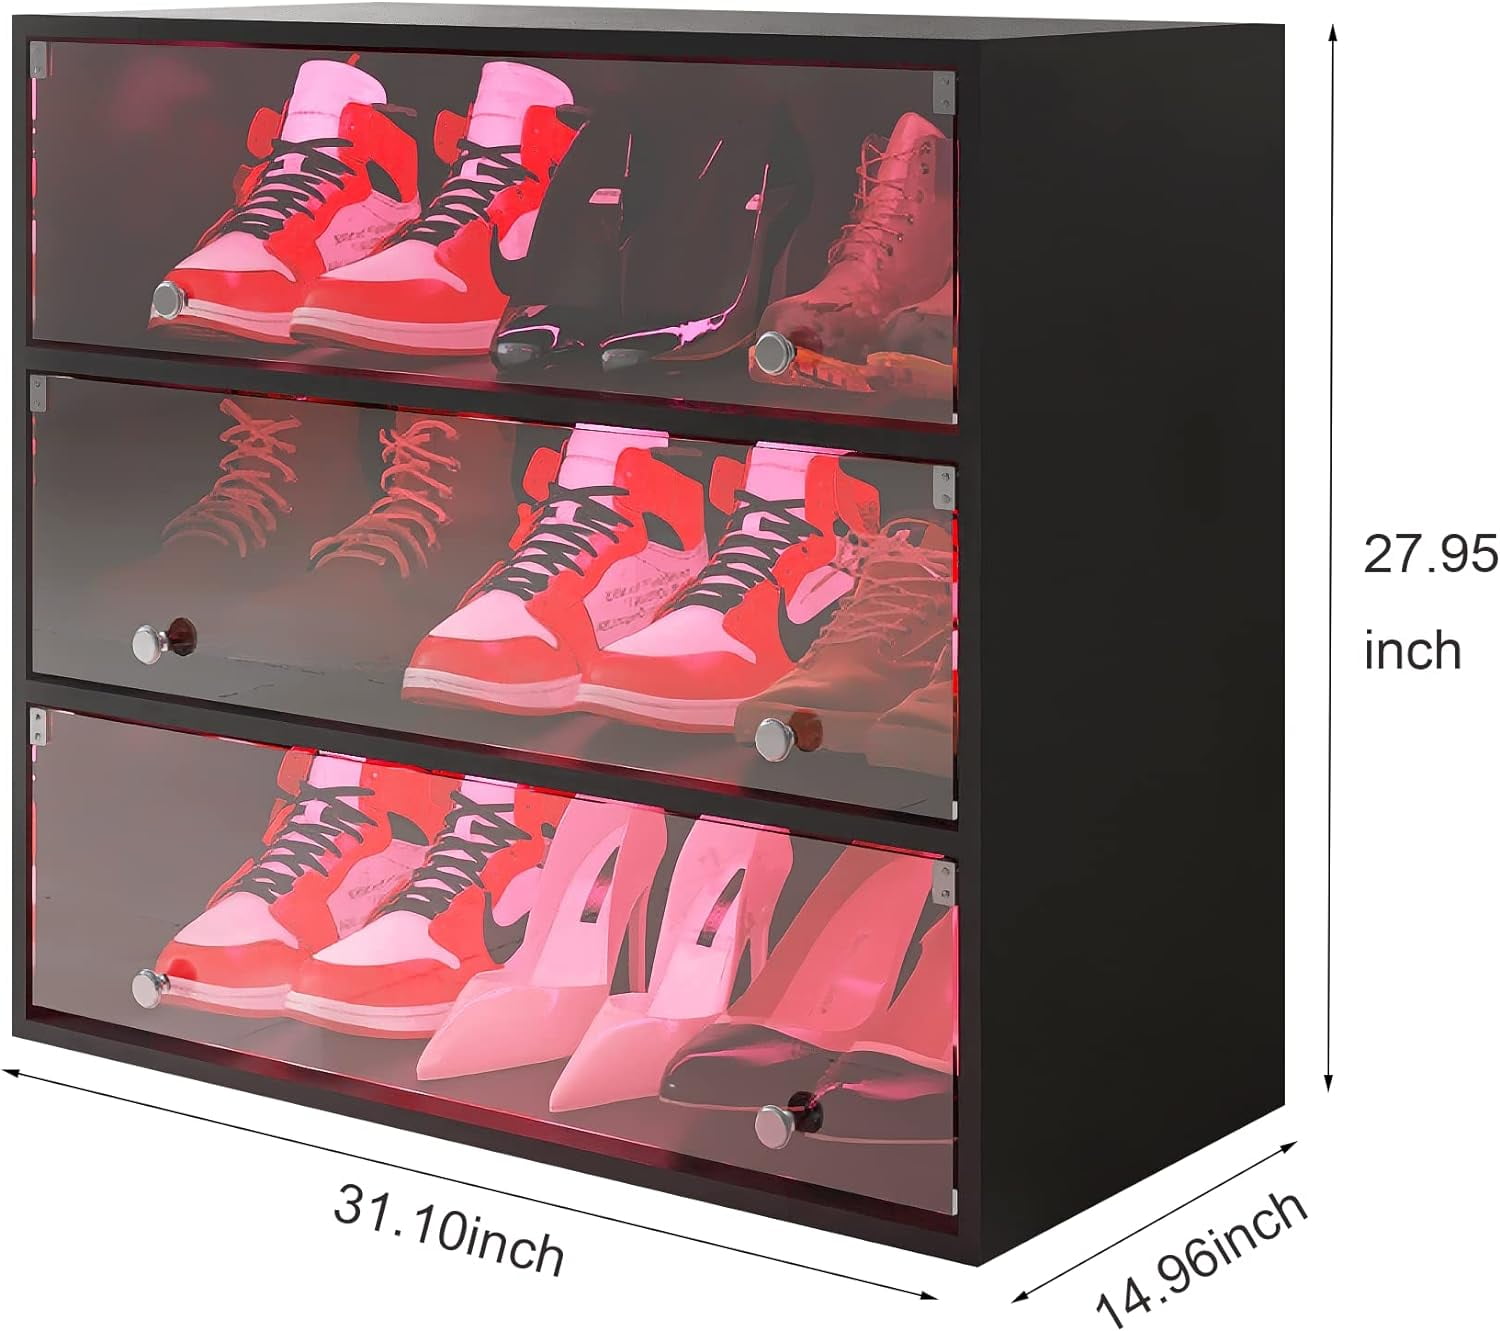 Dextrus 18Pcs Shoe Storage Set 14.1 x 10.9 x 8.2 Foldable Stackable  Sneaker Closet Organizer Clear Big High Quality ABS Container Box with Door